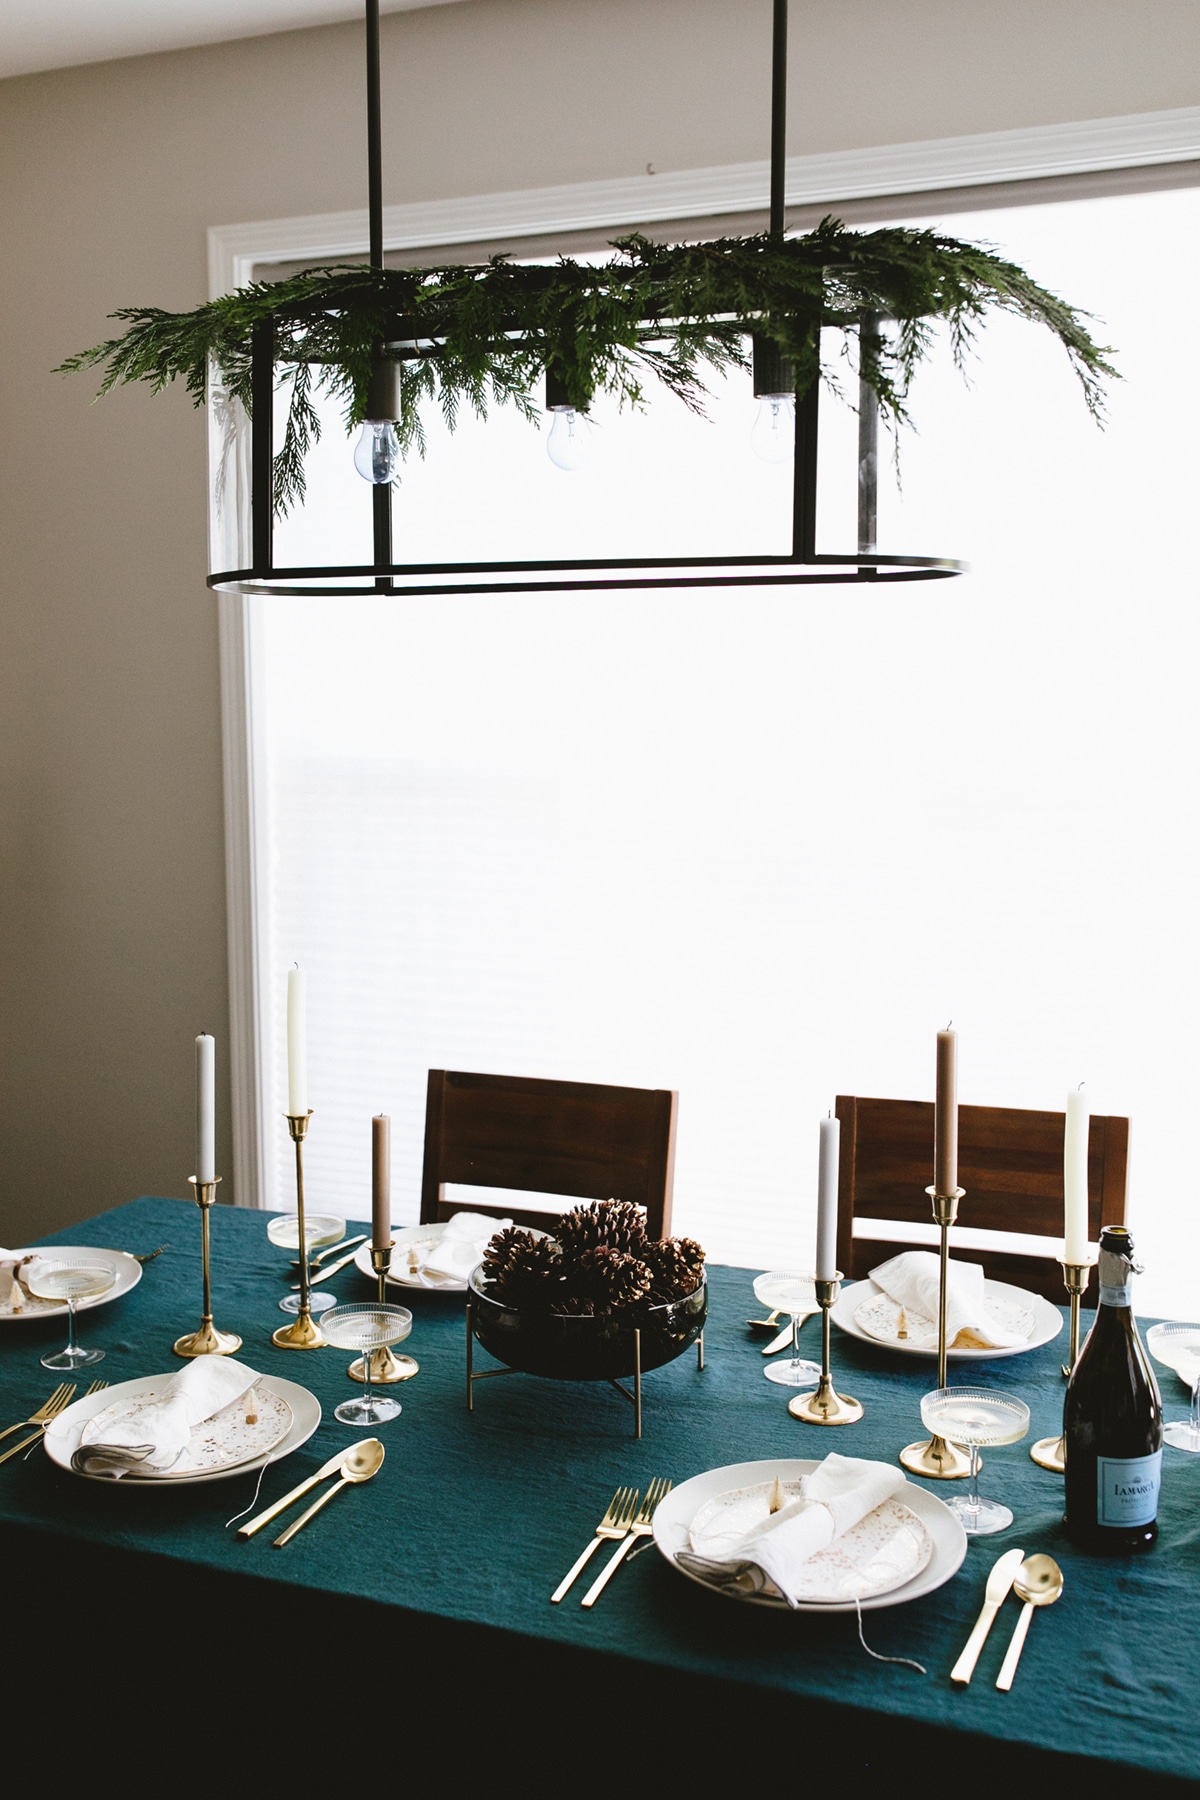 add a little swag to your chandelier to create a festive holiday look in your dining room | coco kelley